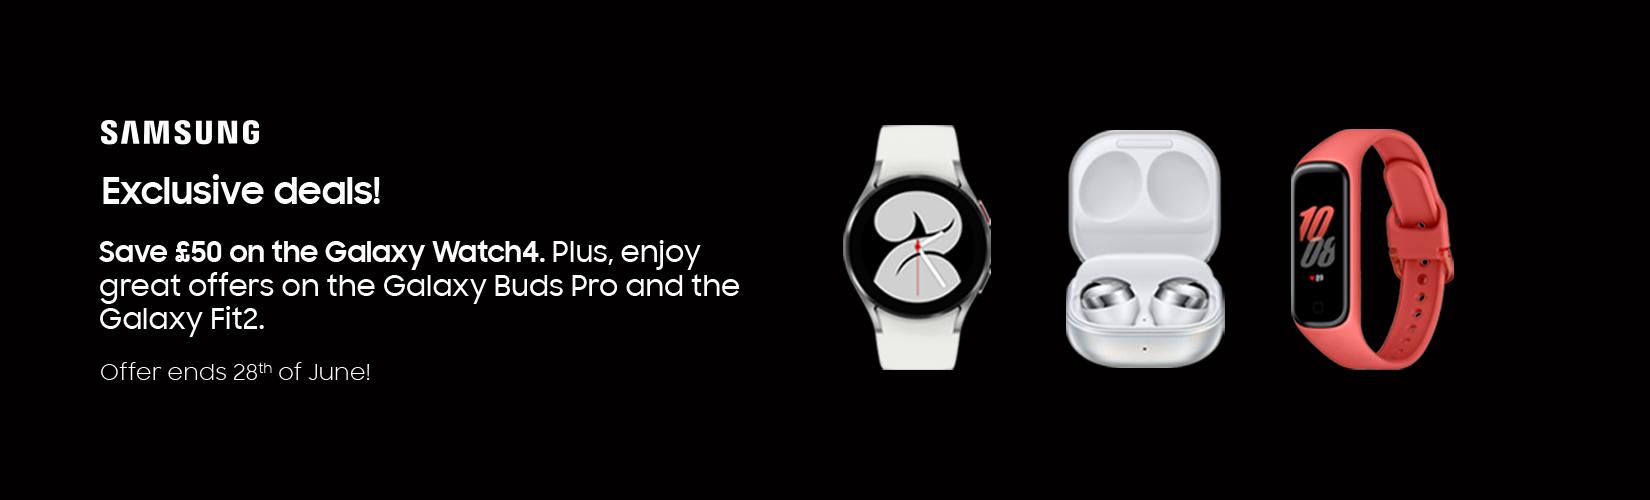 Samsung. Exclusive deals! Save £50 on the Galaxy Watch4. Plus enjoy great offers on the Galaxy Buds Pro and the Galaxy Fit2.